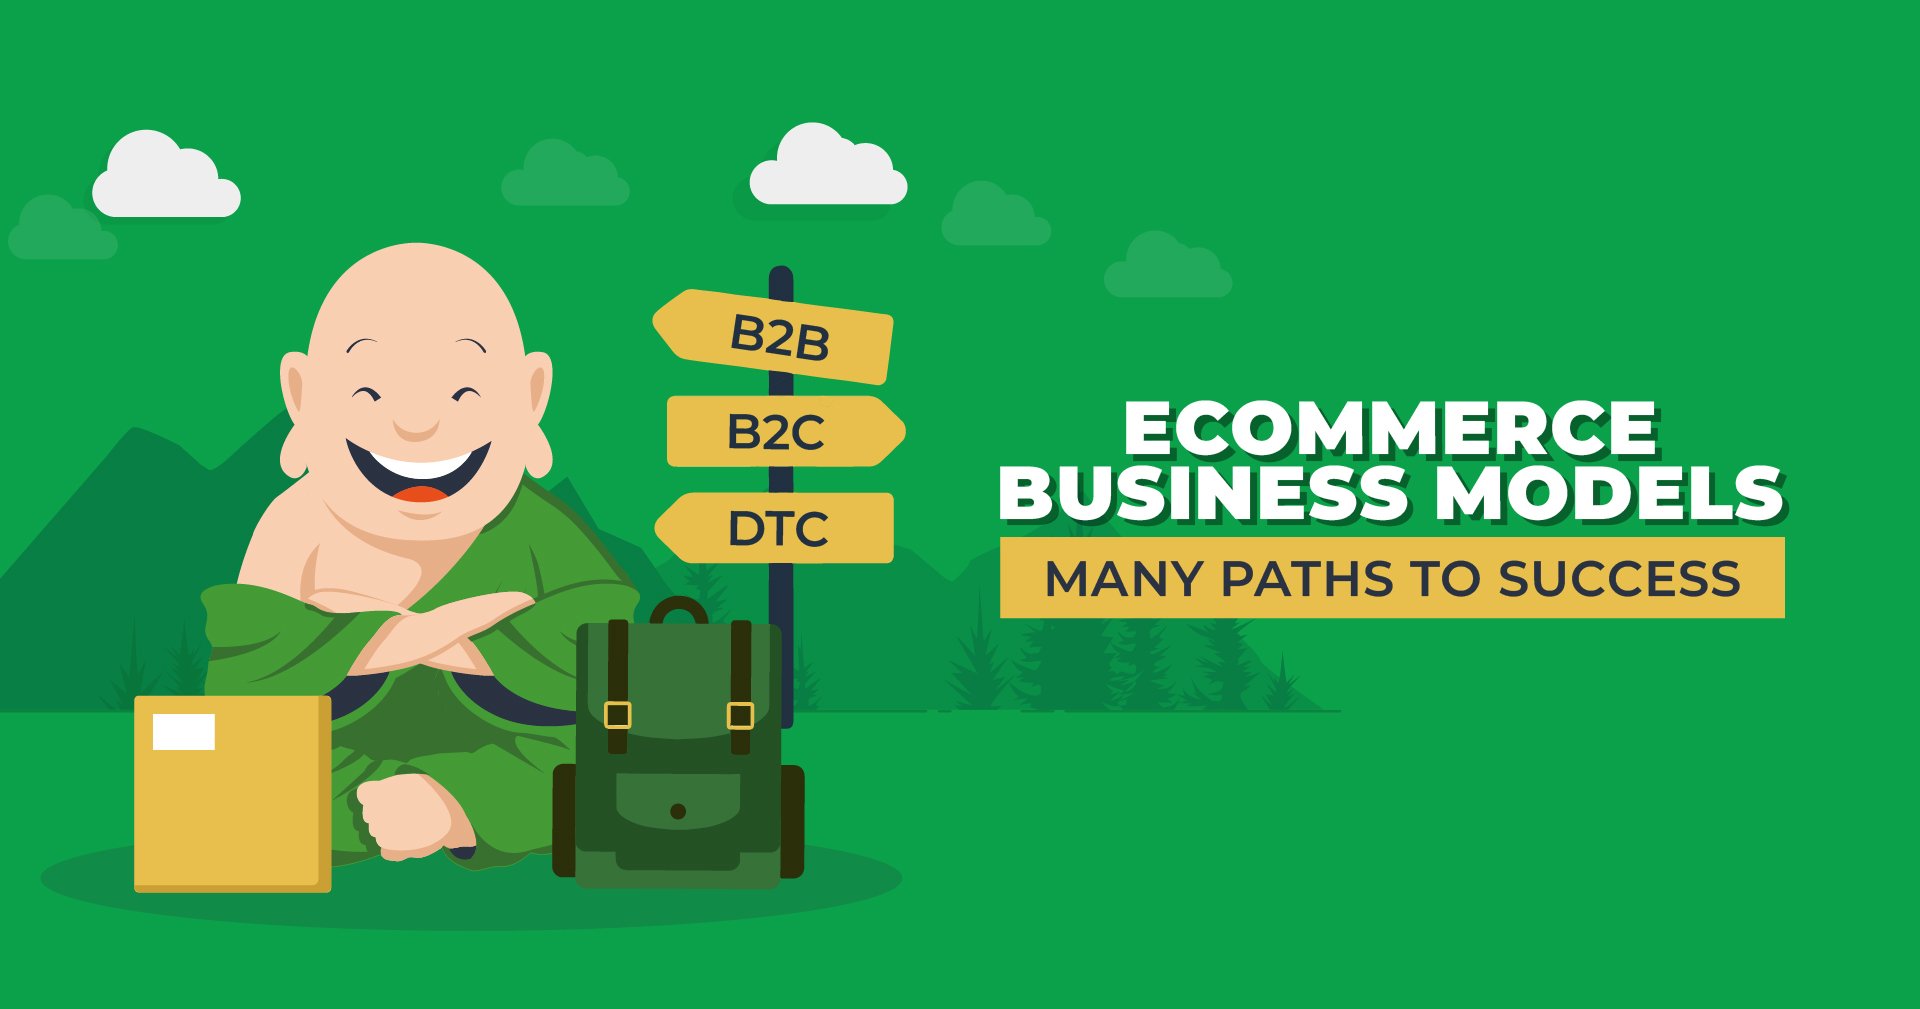 Ecommerce Business Models: Many Paths to Success